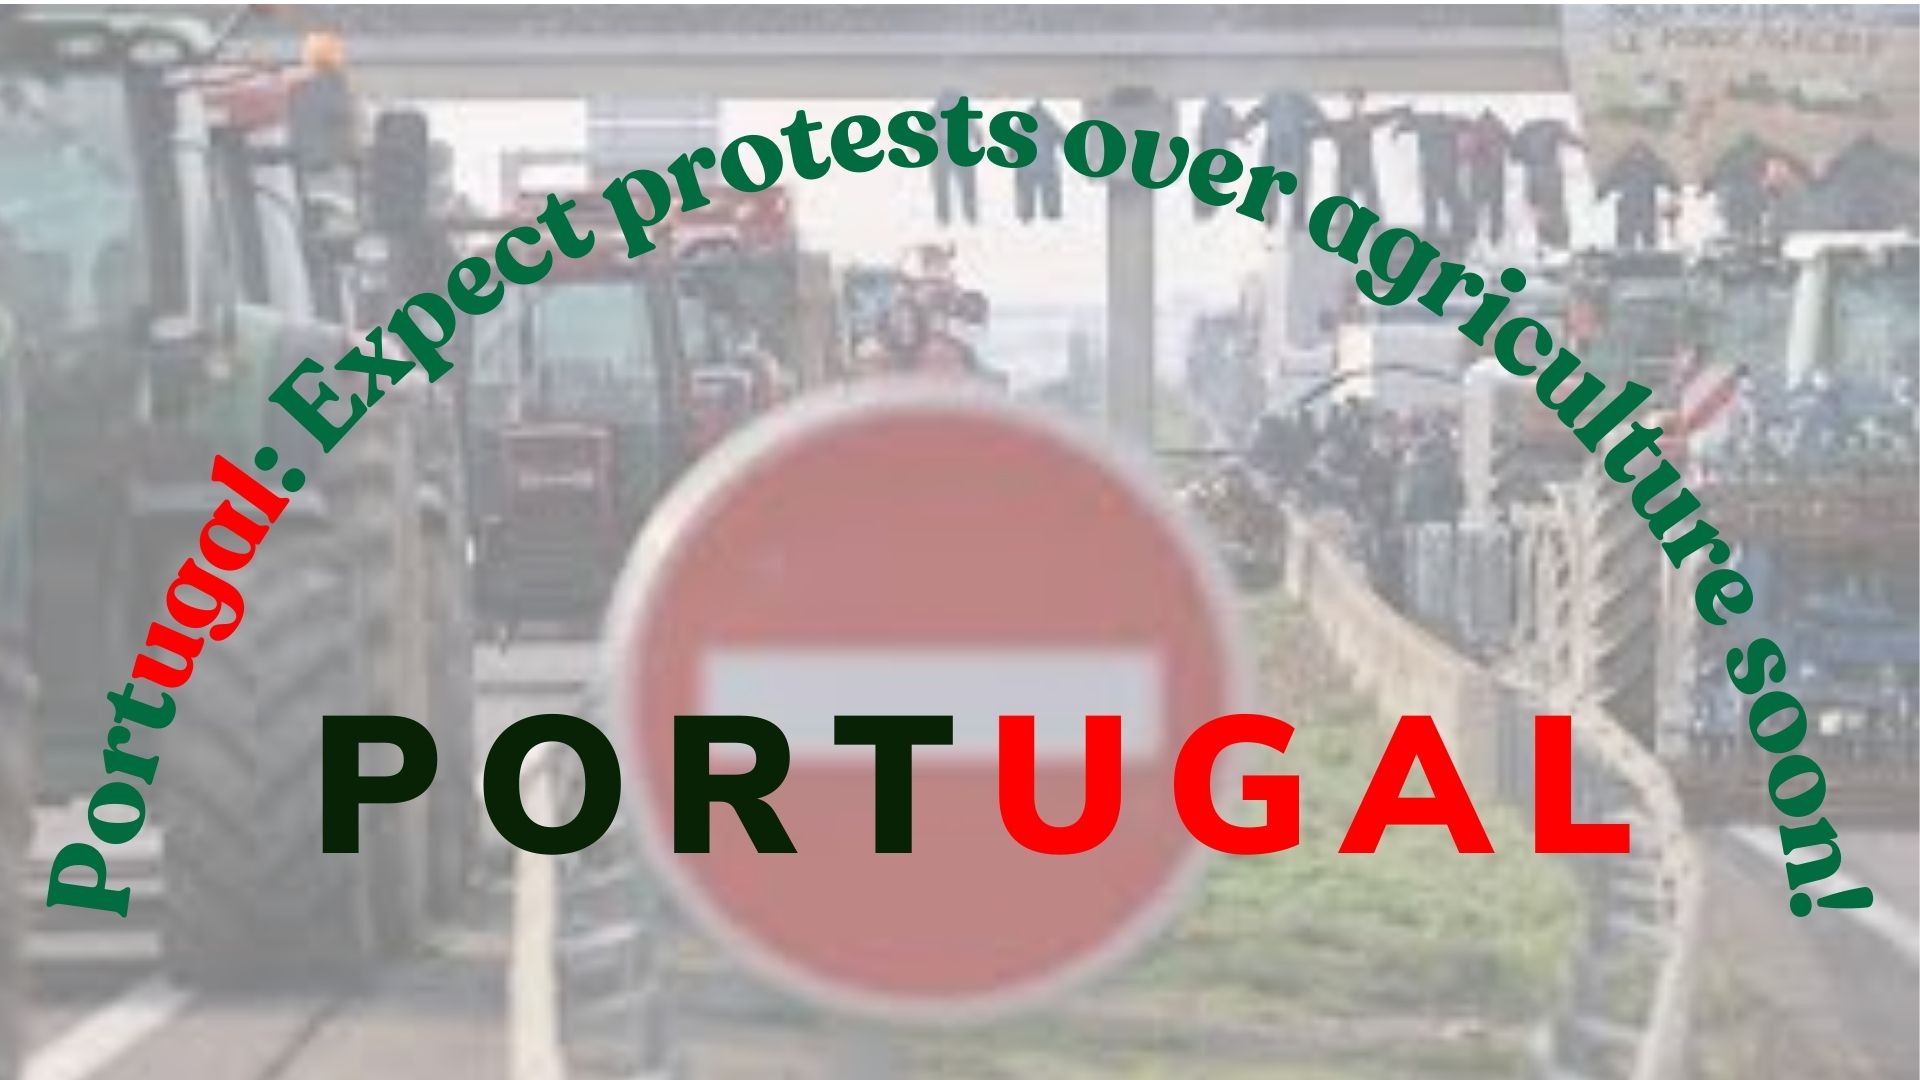 You are currently viewing Portugal: Expect protests over agriculture soon!